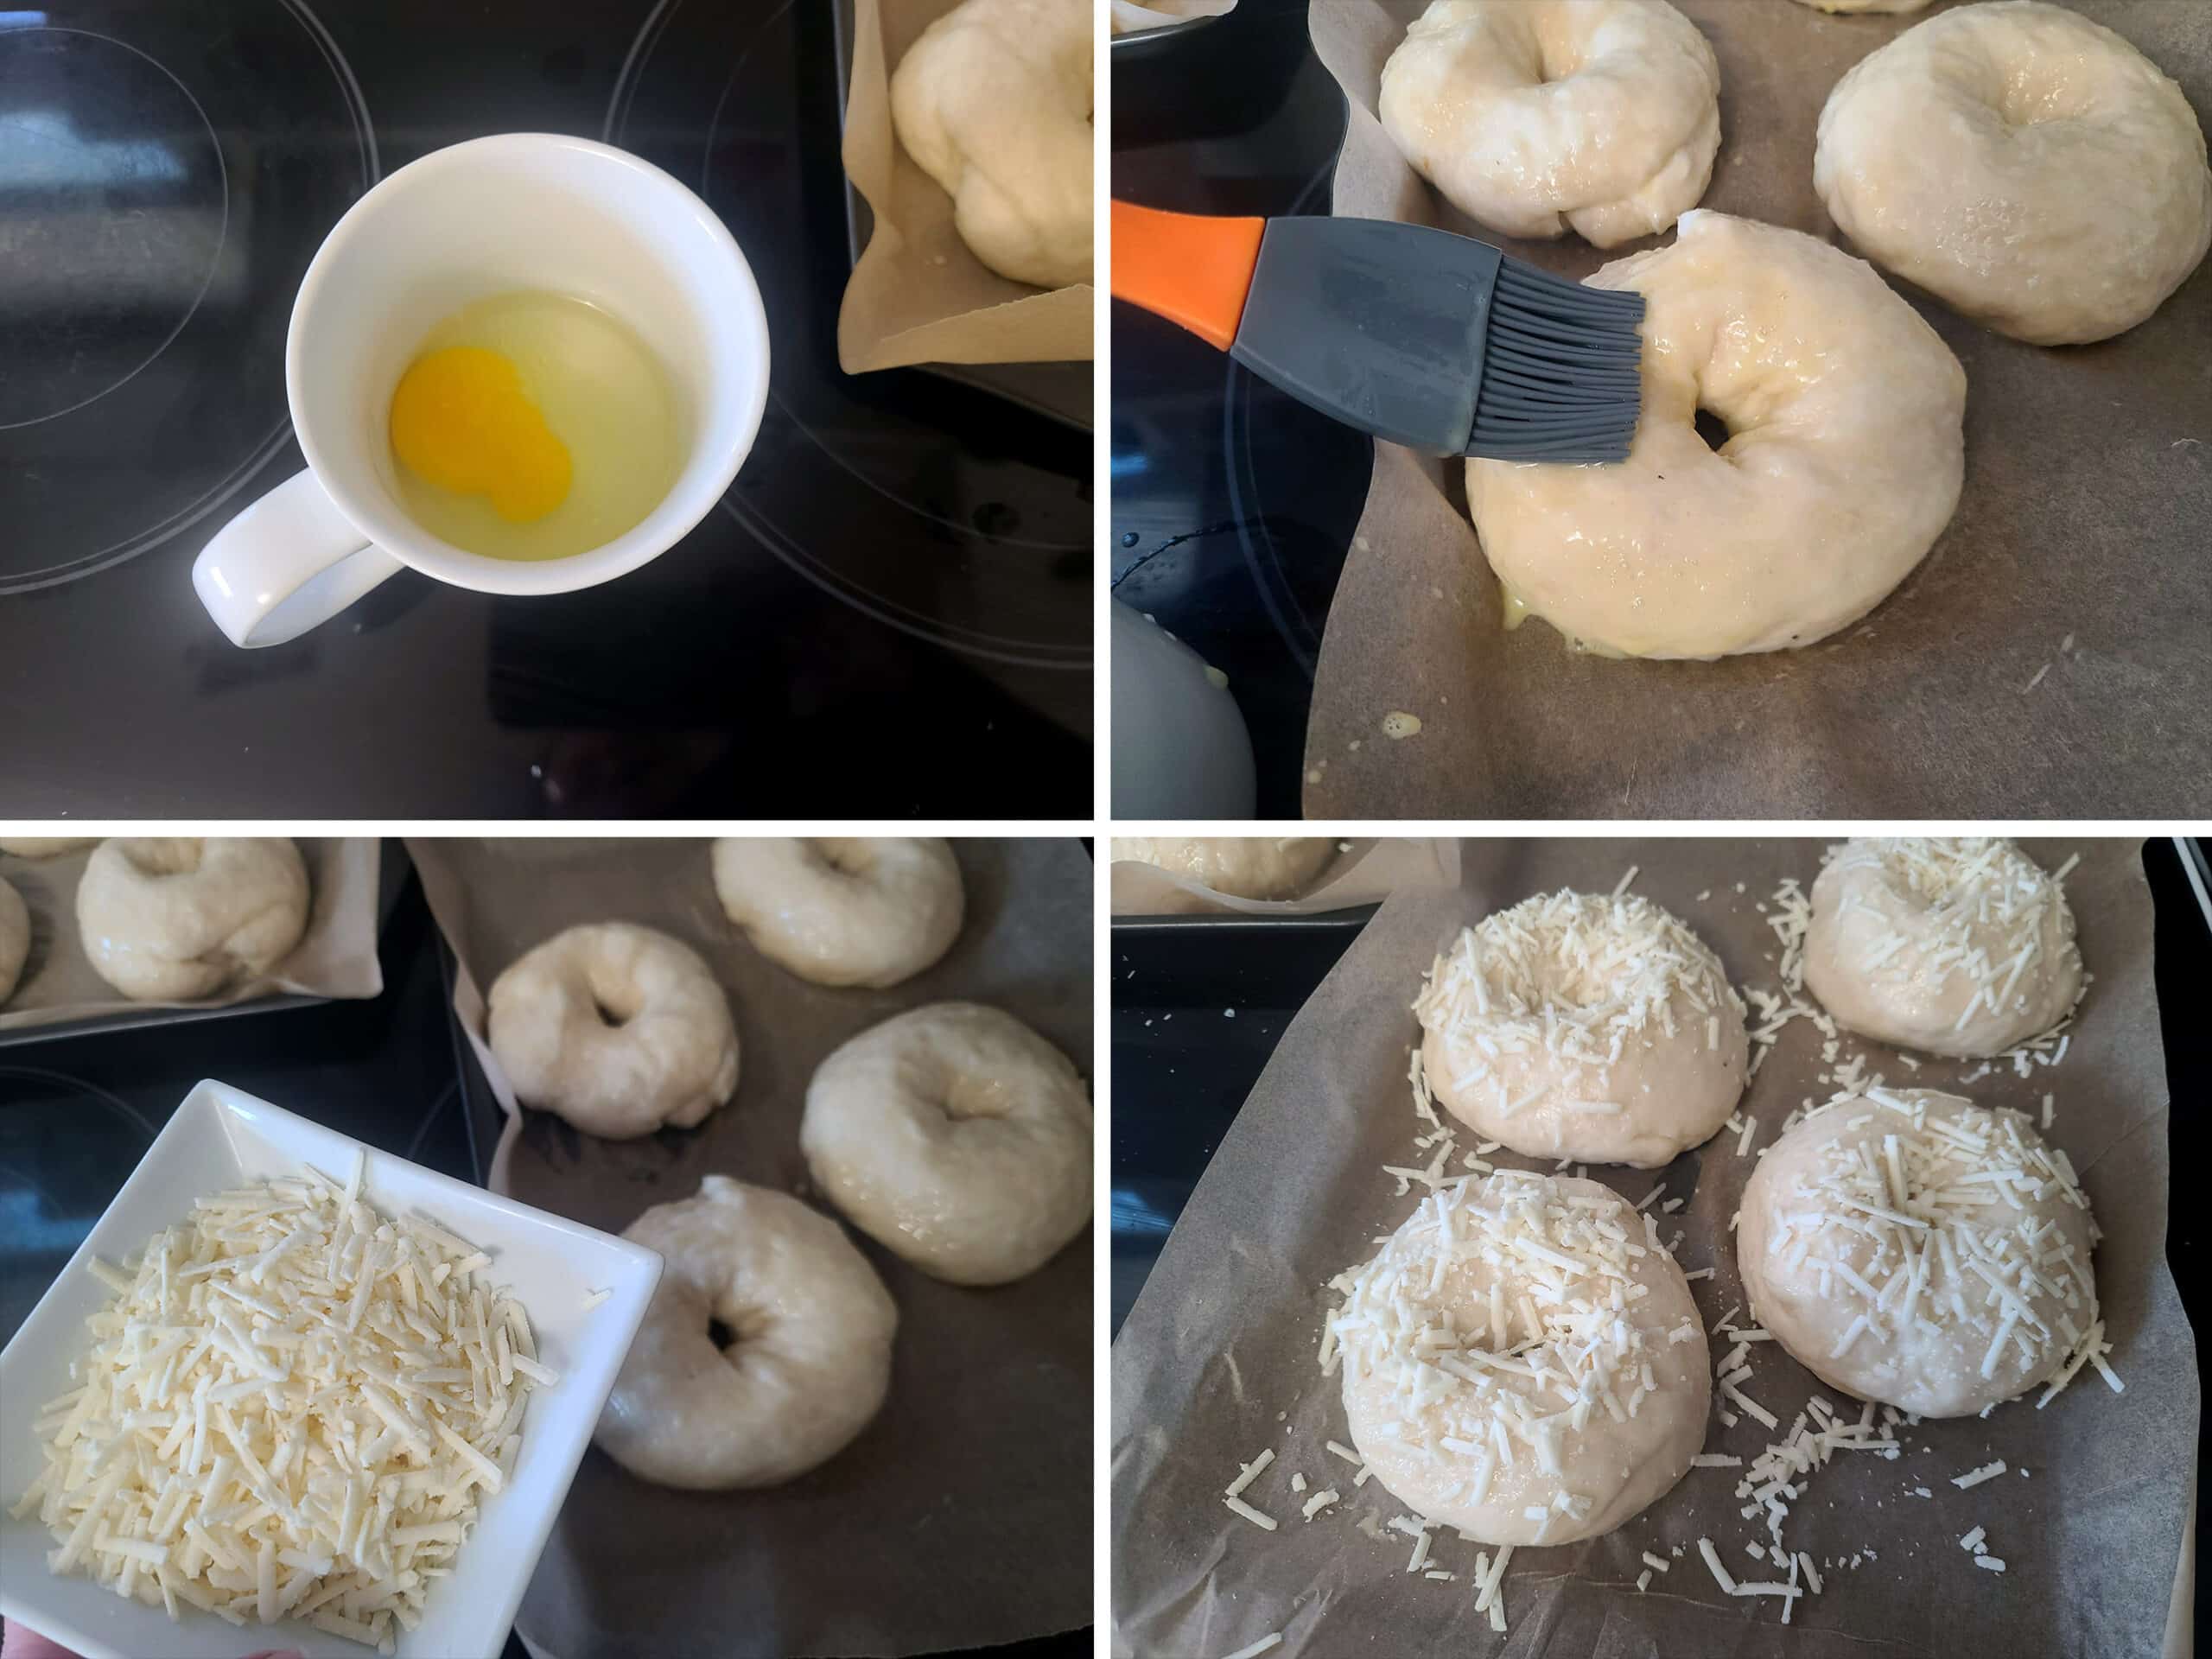 A 4 part image showing the egg wash being mixed, brushed on the asiago bagels, then topped with shredded cheese.